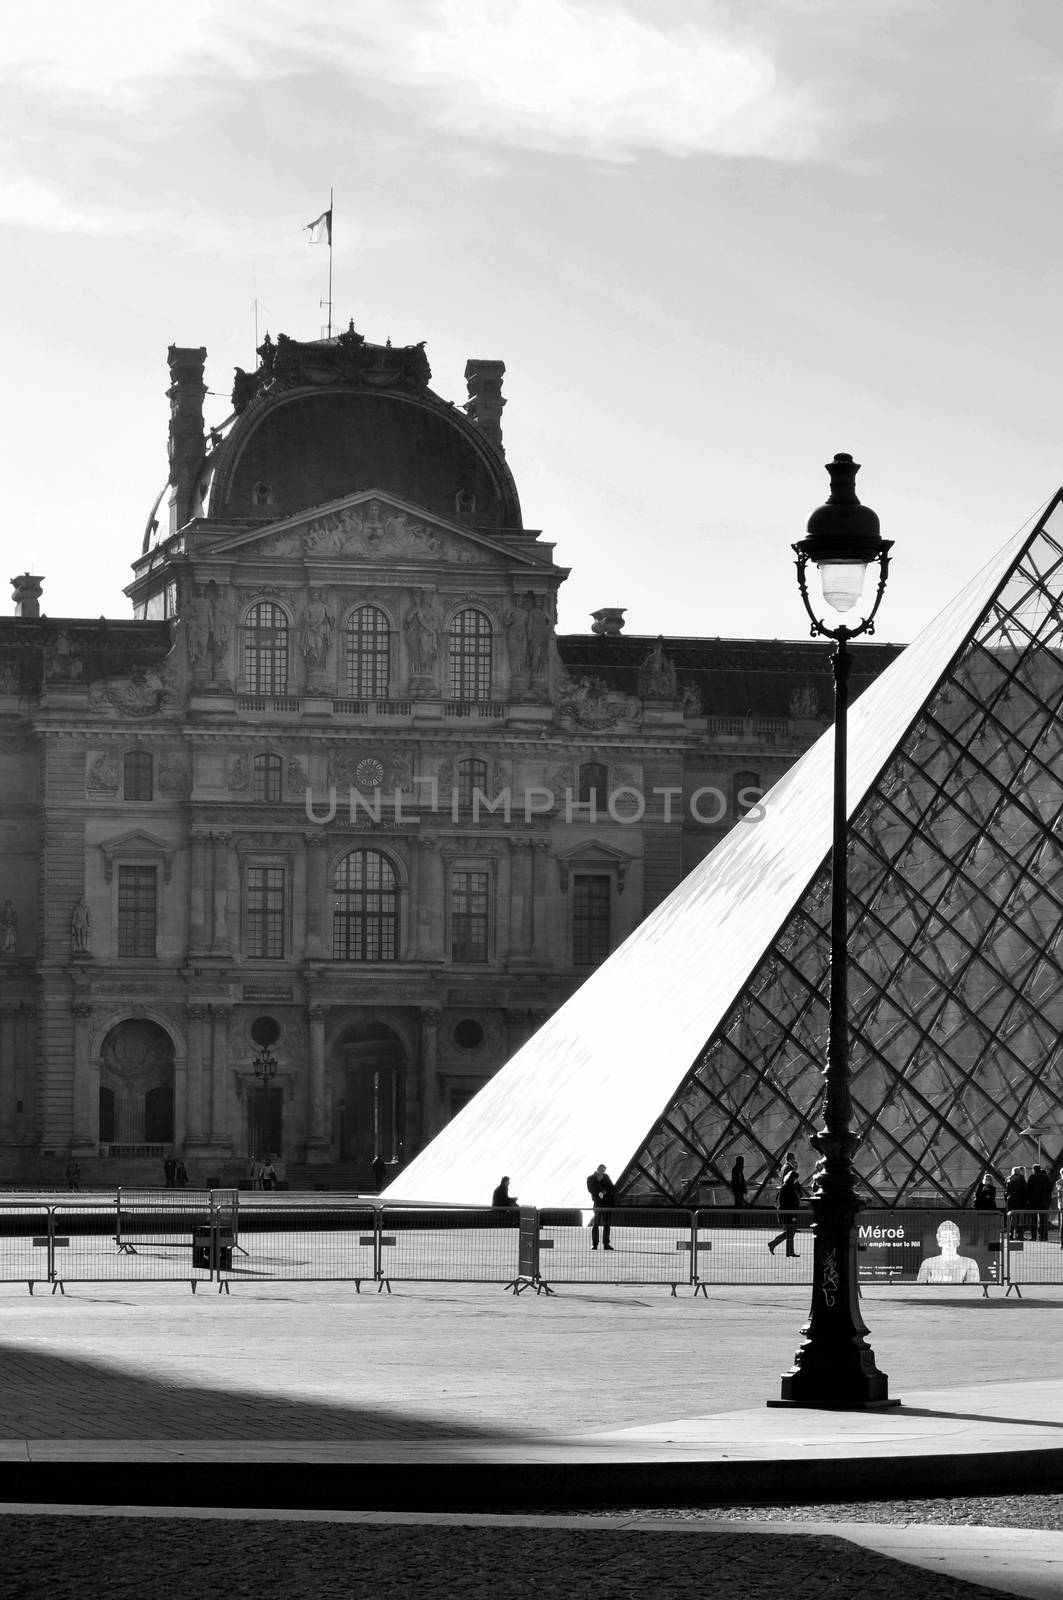 PARIS, FRANCE - CIRCA APRIL 2010: The Louvre Museum and the Pyramid which is the entrance for the museum. Black and white photography.